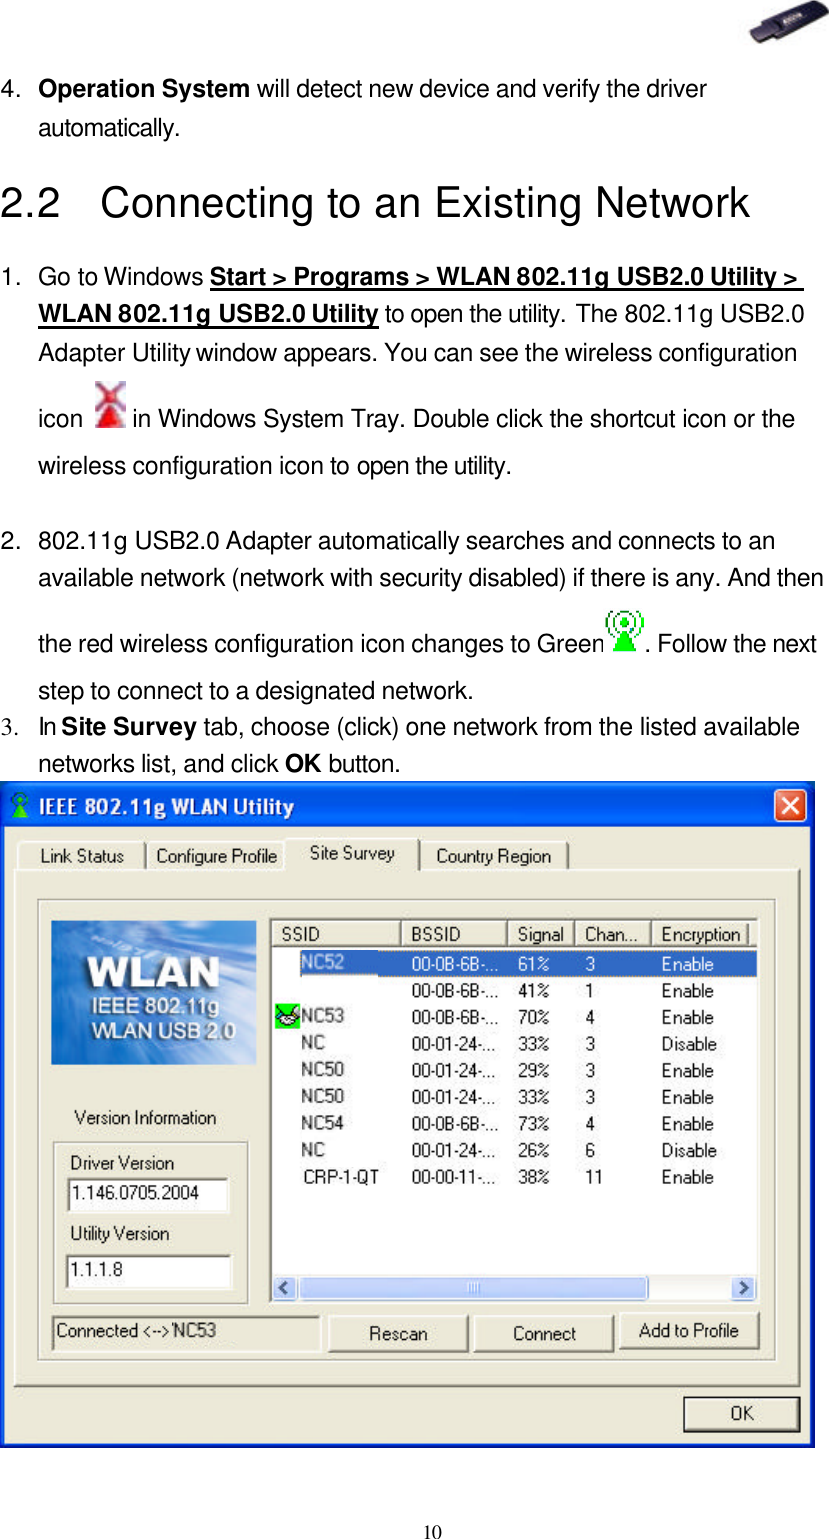   10 4. Operation System will detect new device and verify the driver automatically. 2.2 Connecting to an Existing Network 1. Go to Windows Start &gt; Programs &gt; WLAN 802.11g USB2.0 Utility &gt; WLAN 802.11g USB2.0 Utility to open the utility. The 802.11g USB2.0 Adapter Utility window appears. You can see the wireless configuration icon   in Windows System Tray. Double click the shortcut icon or the wireless configuration icon to open the utility.  2. 802.11g USB2.0 Adapter automatically searches and connects to an available network (network with security disabled) if there is any. And then the red wireless configuration icon changes to Green . Follow the next step to connect to a designated network. 3.  In Site Survey tab, choose (click) one network from the listed available networks list, and click OK button.  